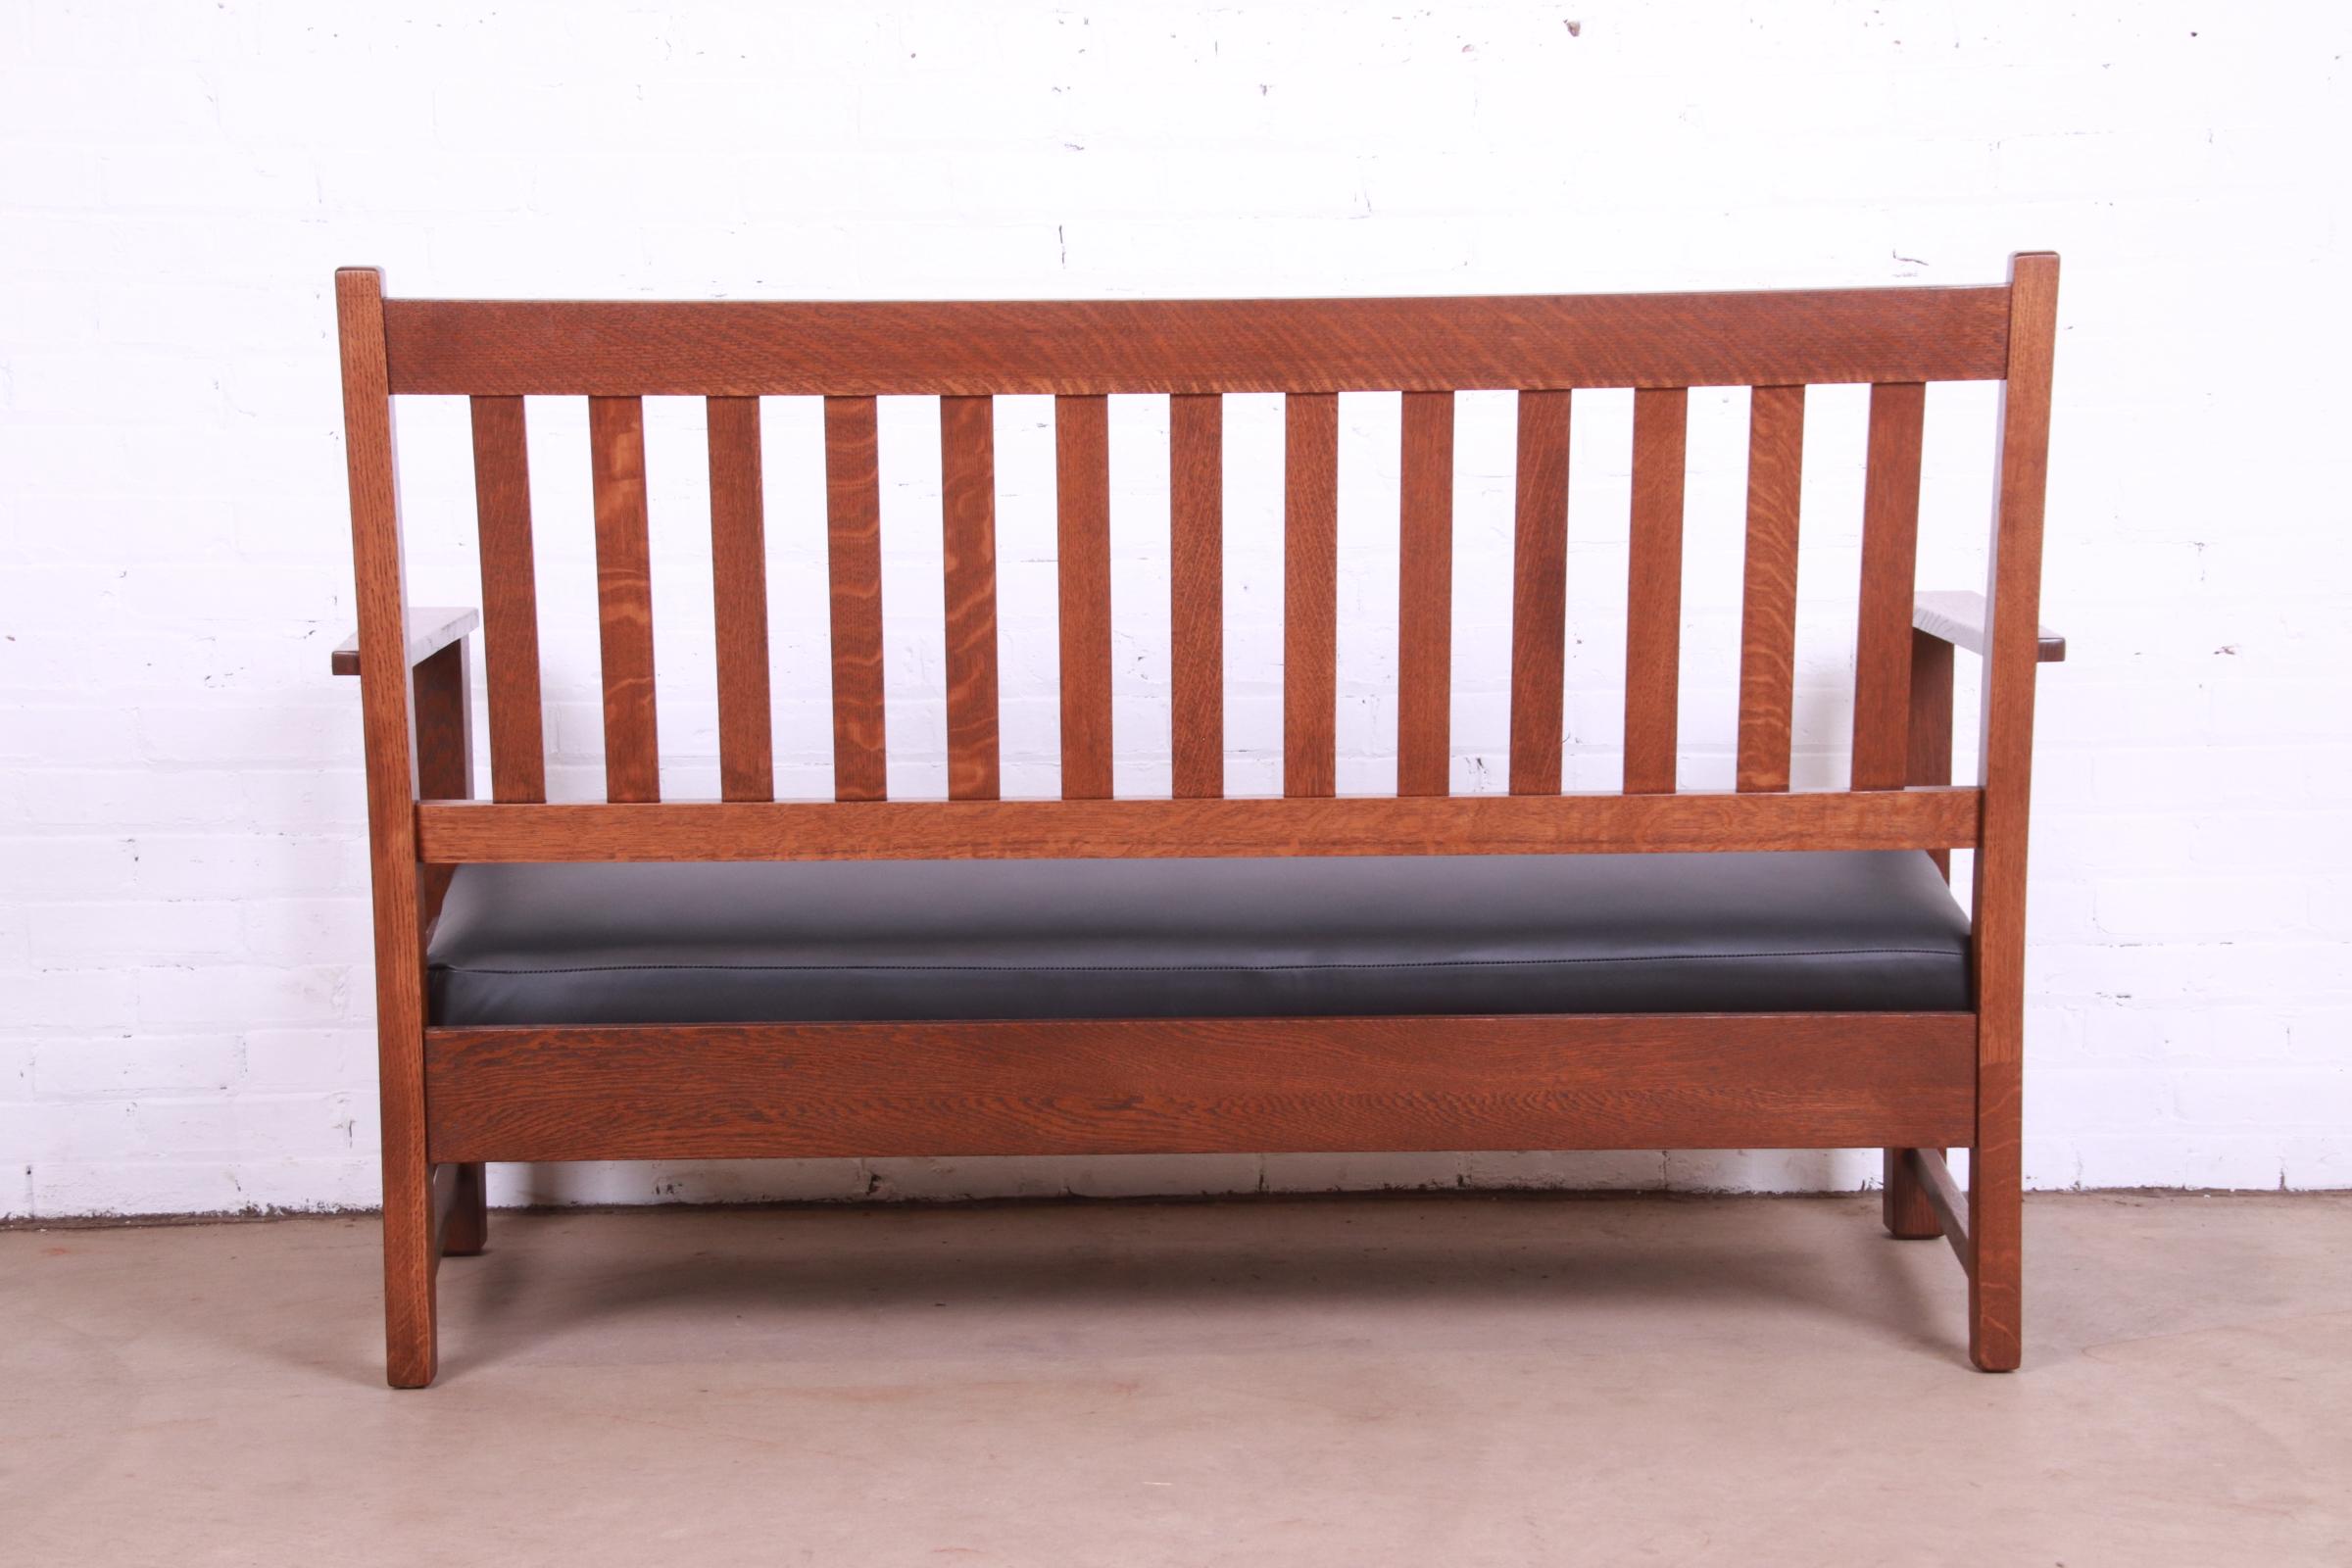 20th Century Limbert Mission Oak Arts & Crafts Open Arm Sofa or Settee, Fully Restored For Sale